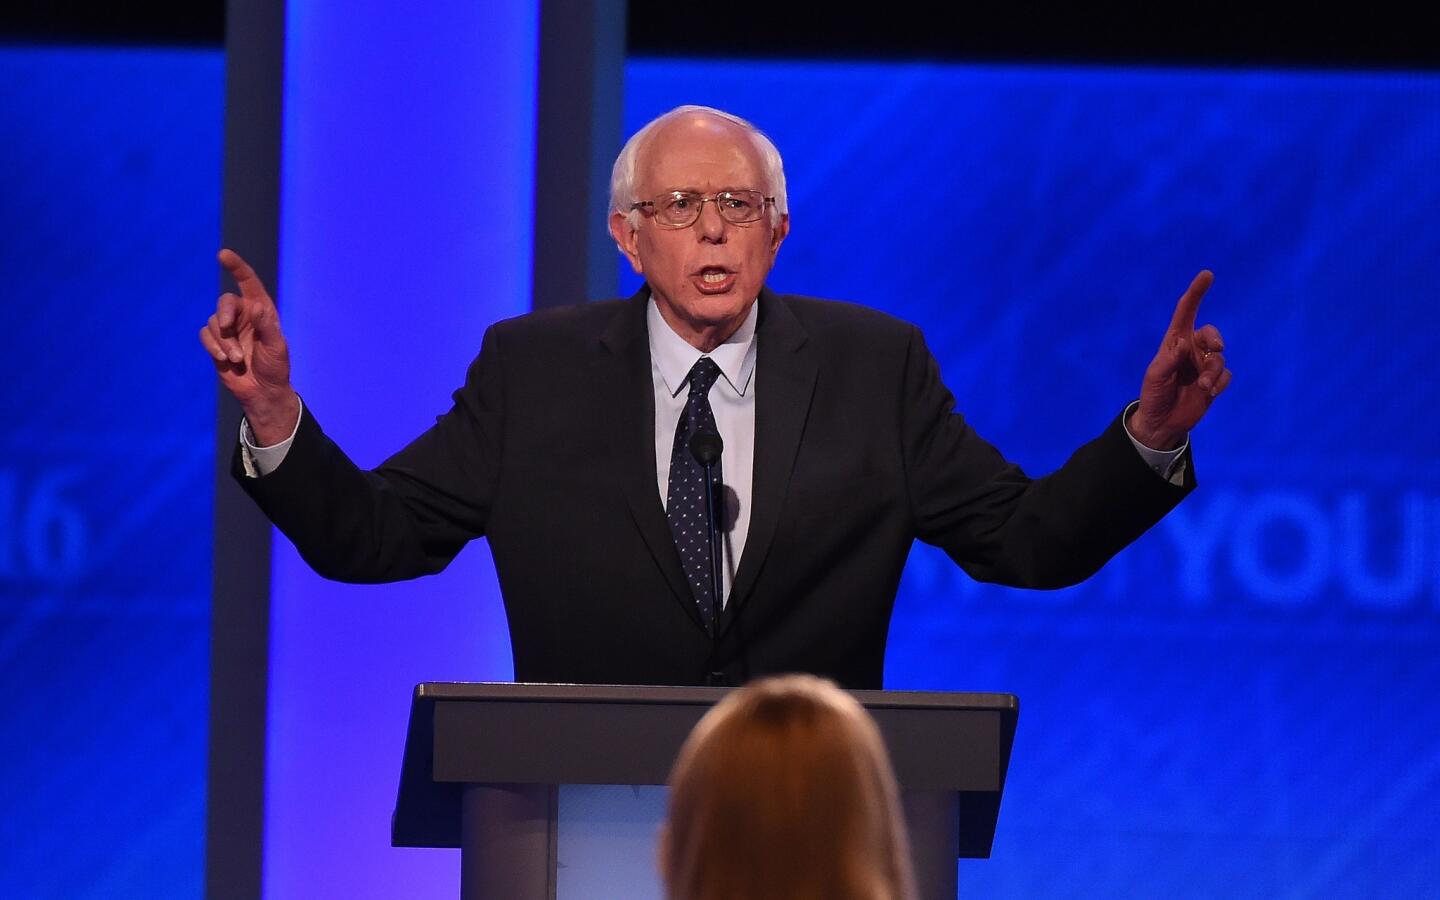 Bernie Sanders participates in the Democratic debate at the Saint Anselm College in Manchester, N.H., on Dec. 19, 2015.